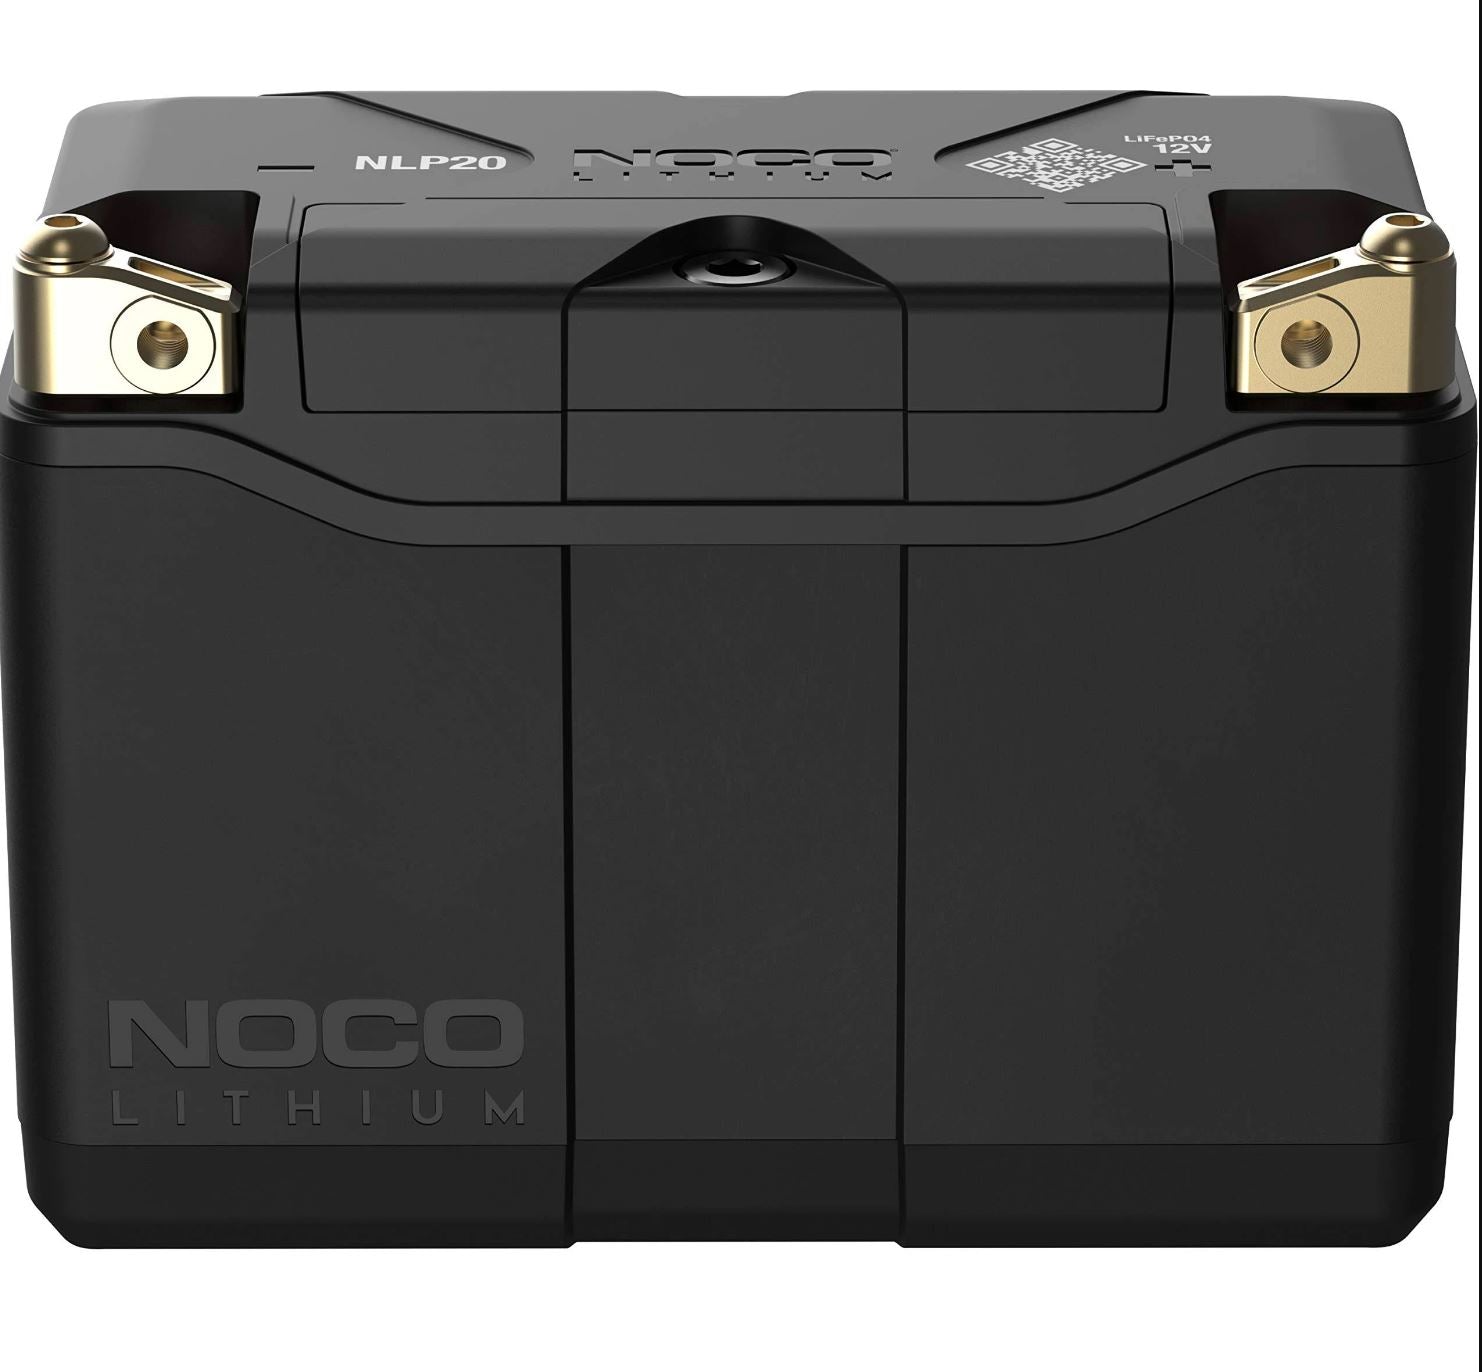 Noco NLP20 12v 600a Universal Lithium Powersport Battery Bci group size 20 - Battery World